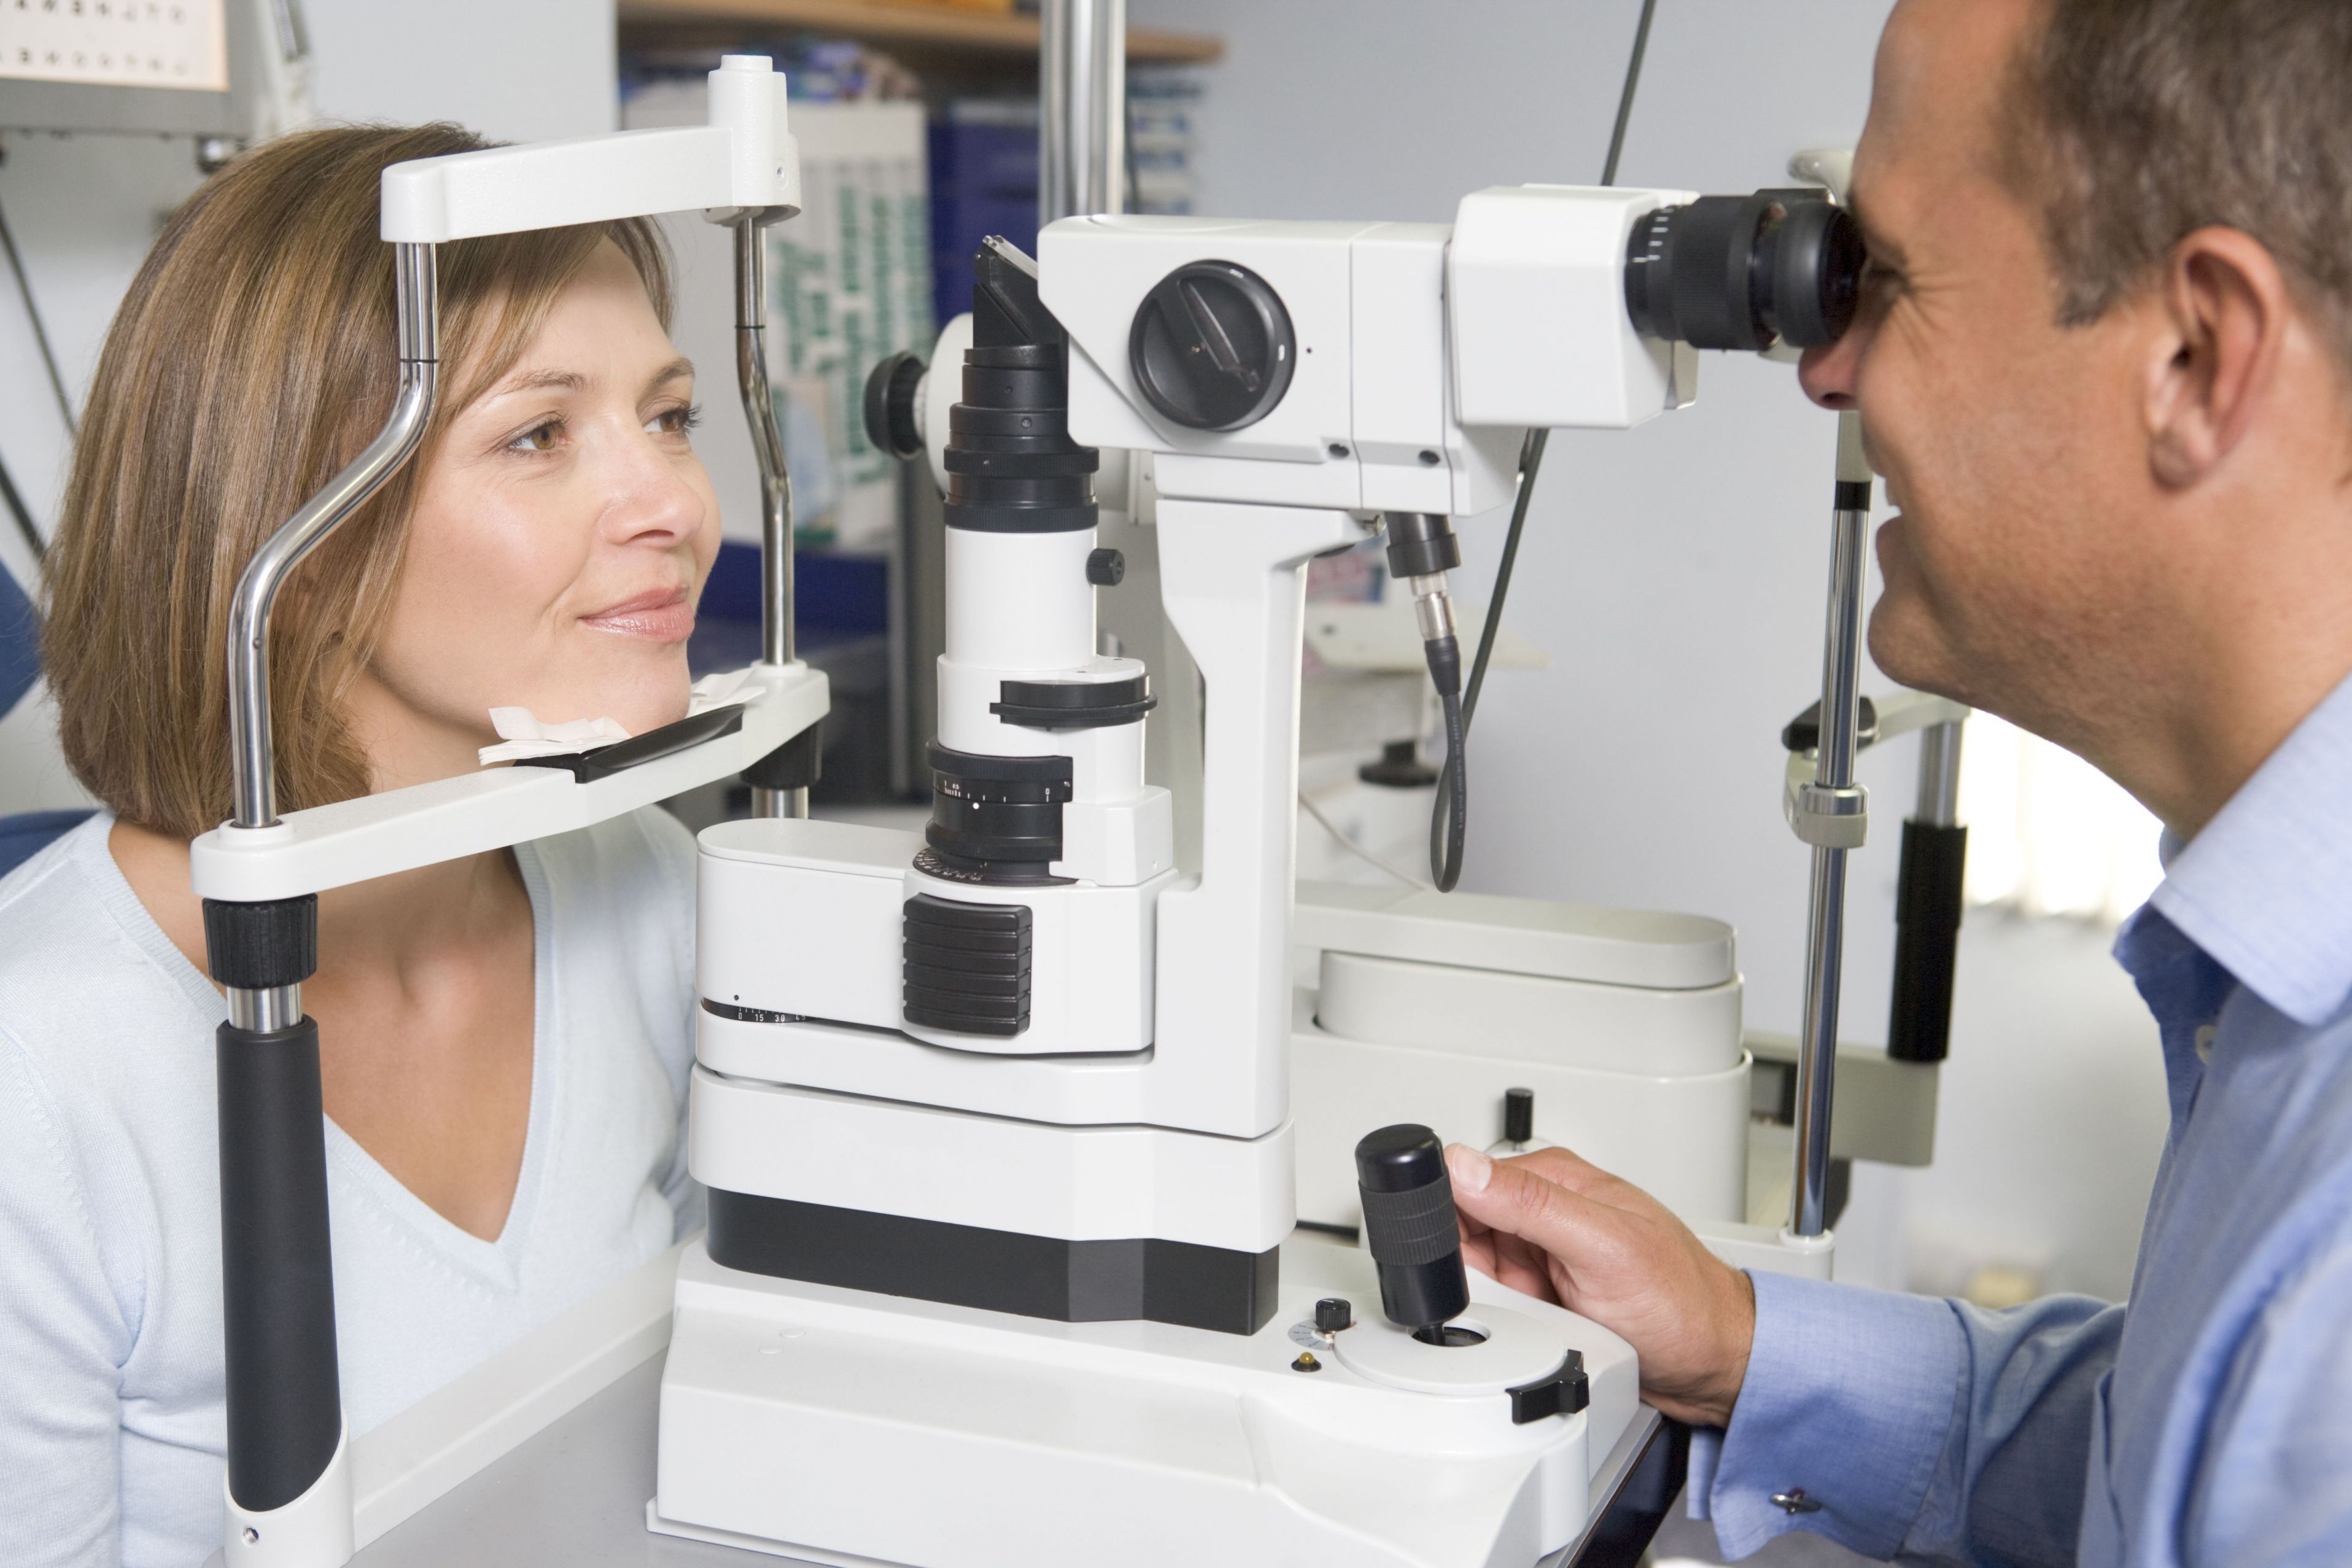 Visit An Optometric Eye Care Center in Chicago for Eyeglasses and Contact Lenses